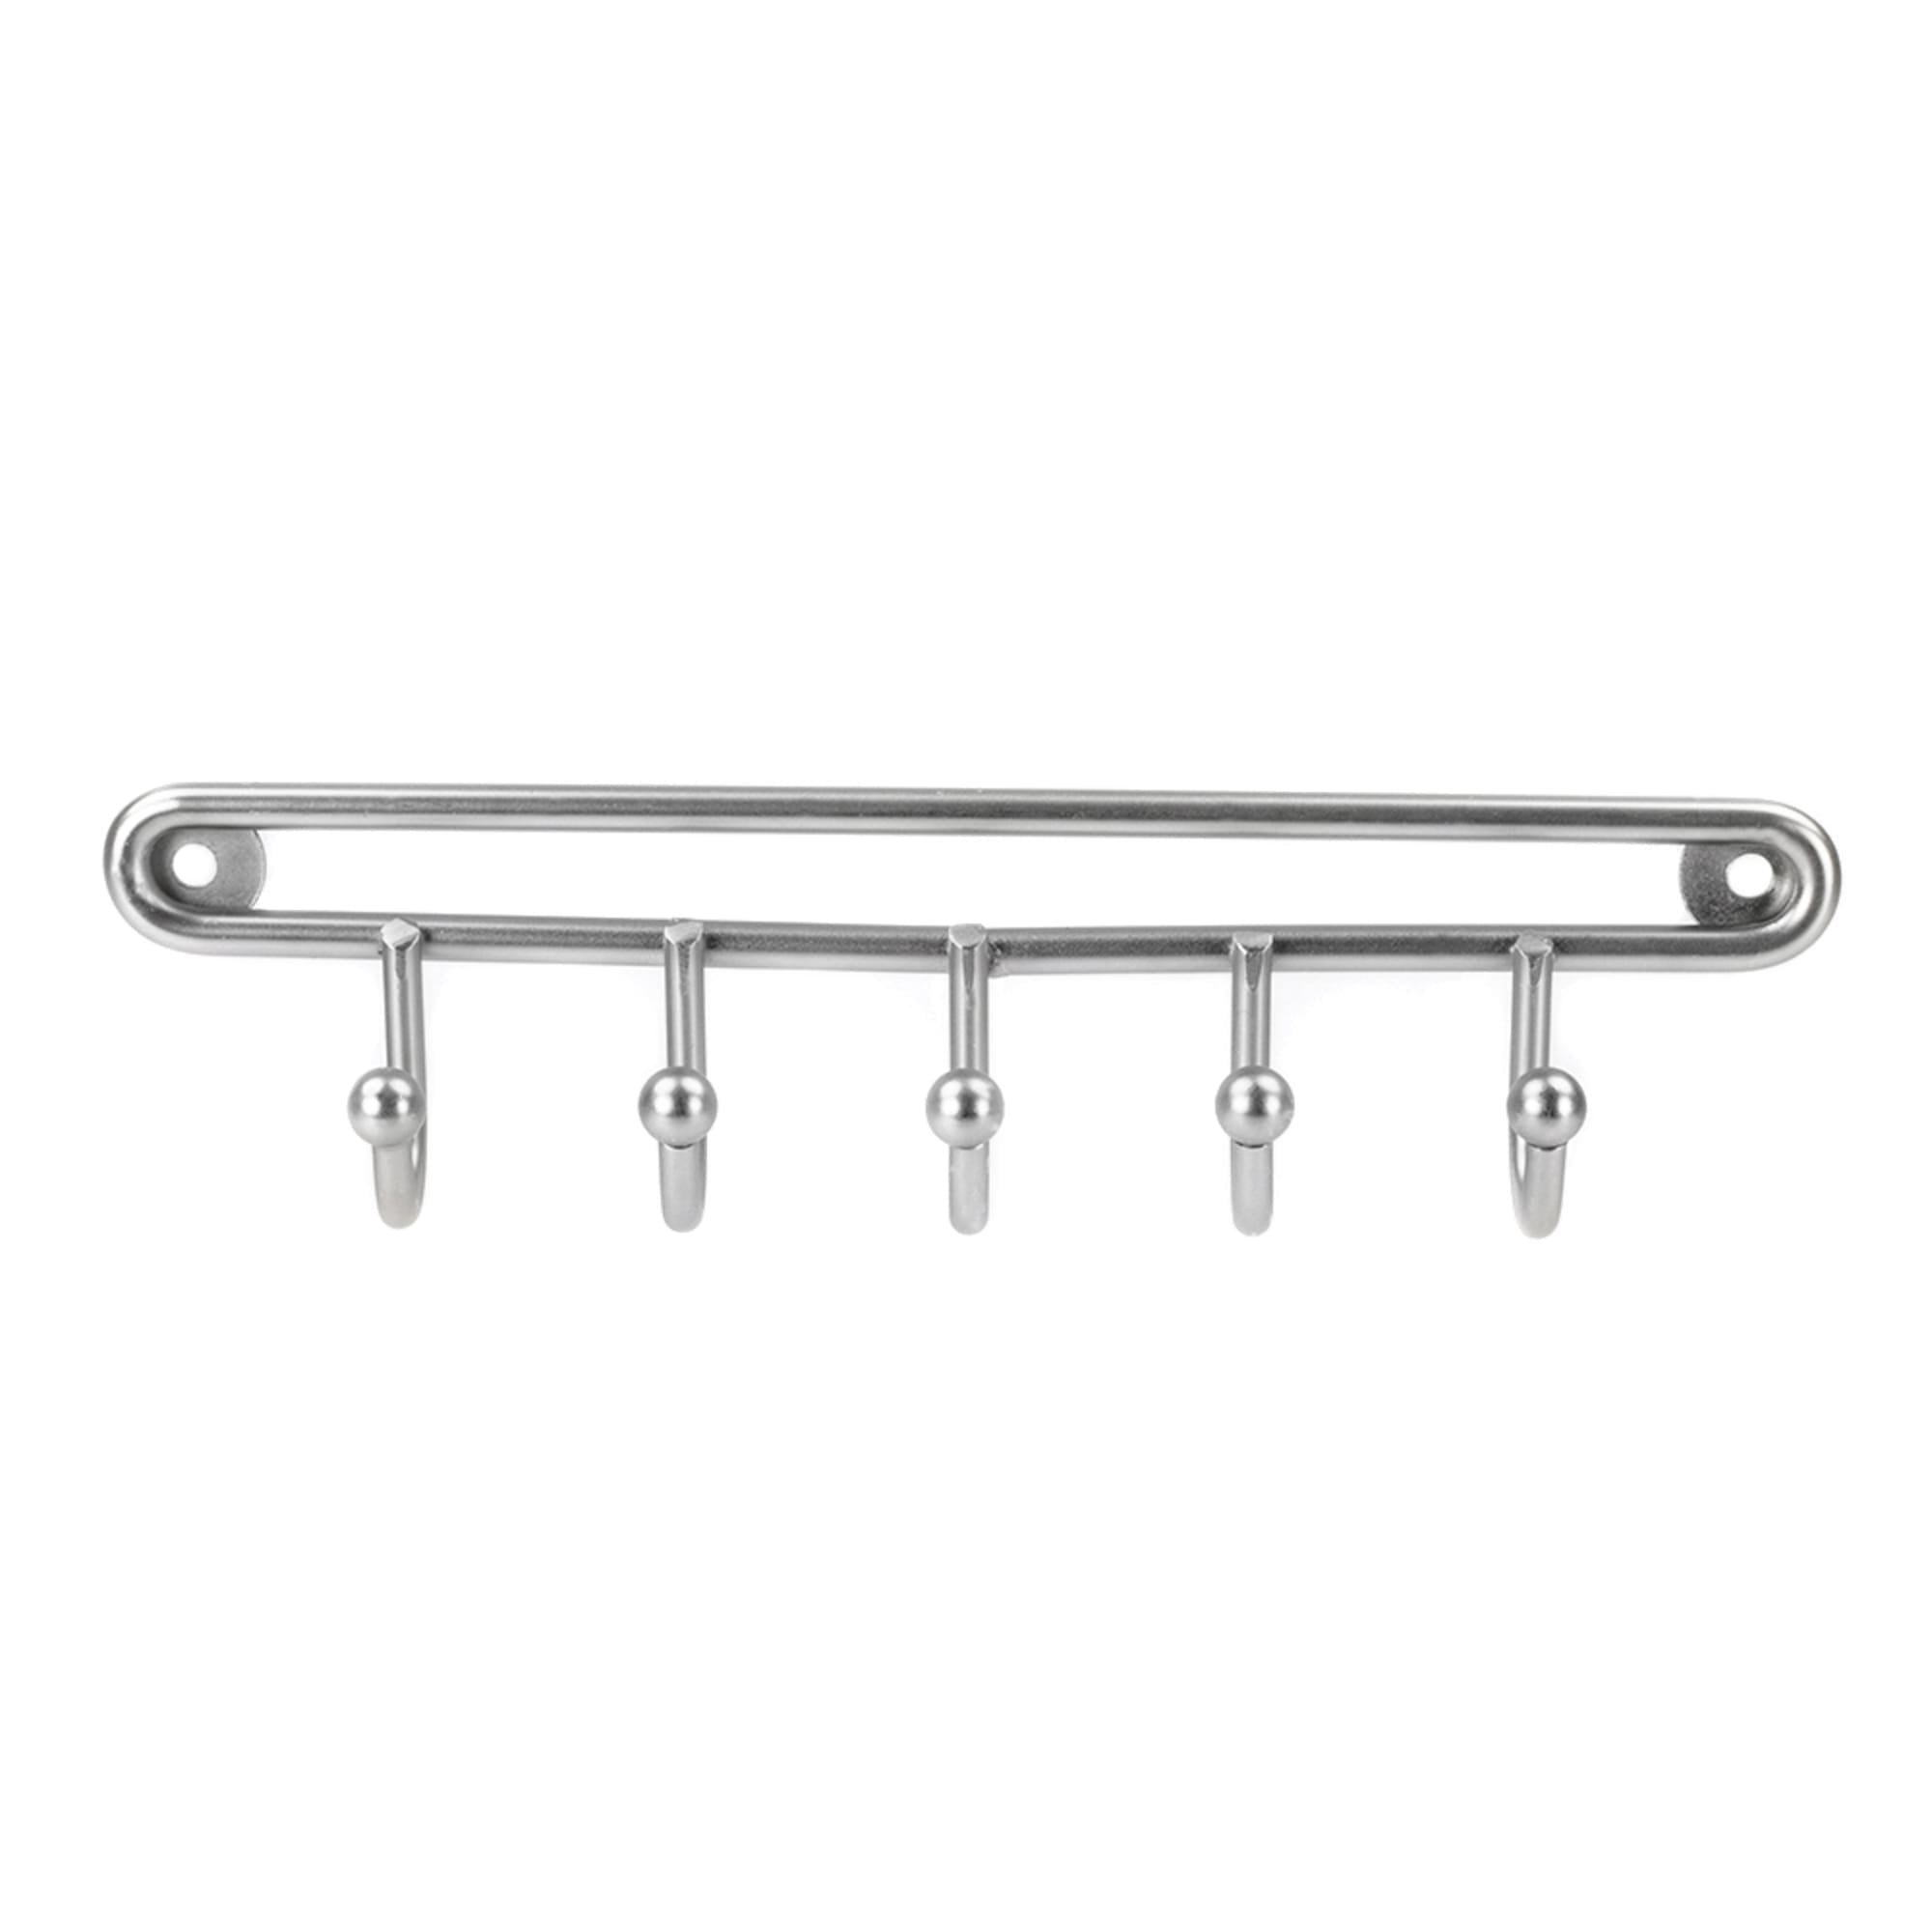 Home Basics Simplicity Collection 5 Hook Key Organizer, Satin Nickel $3.00 EACH, CASE PACK OF 12